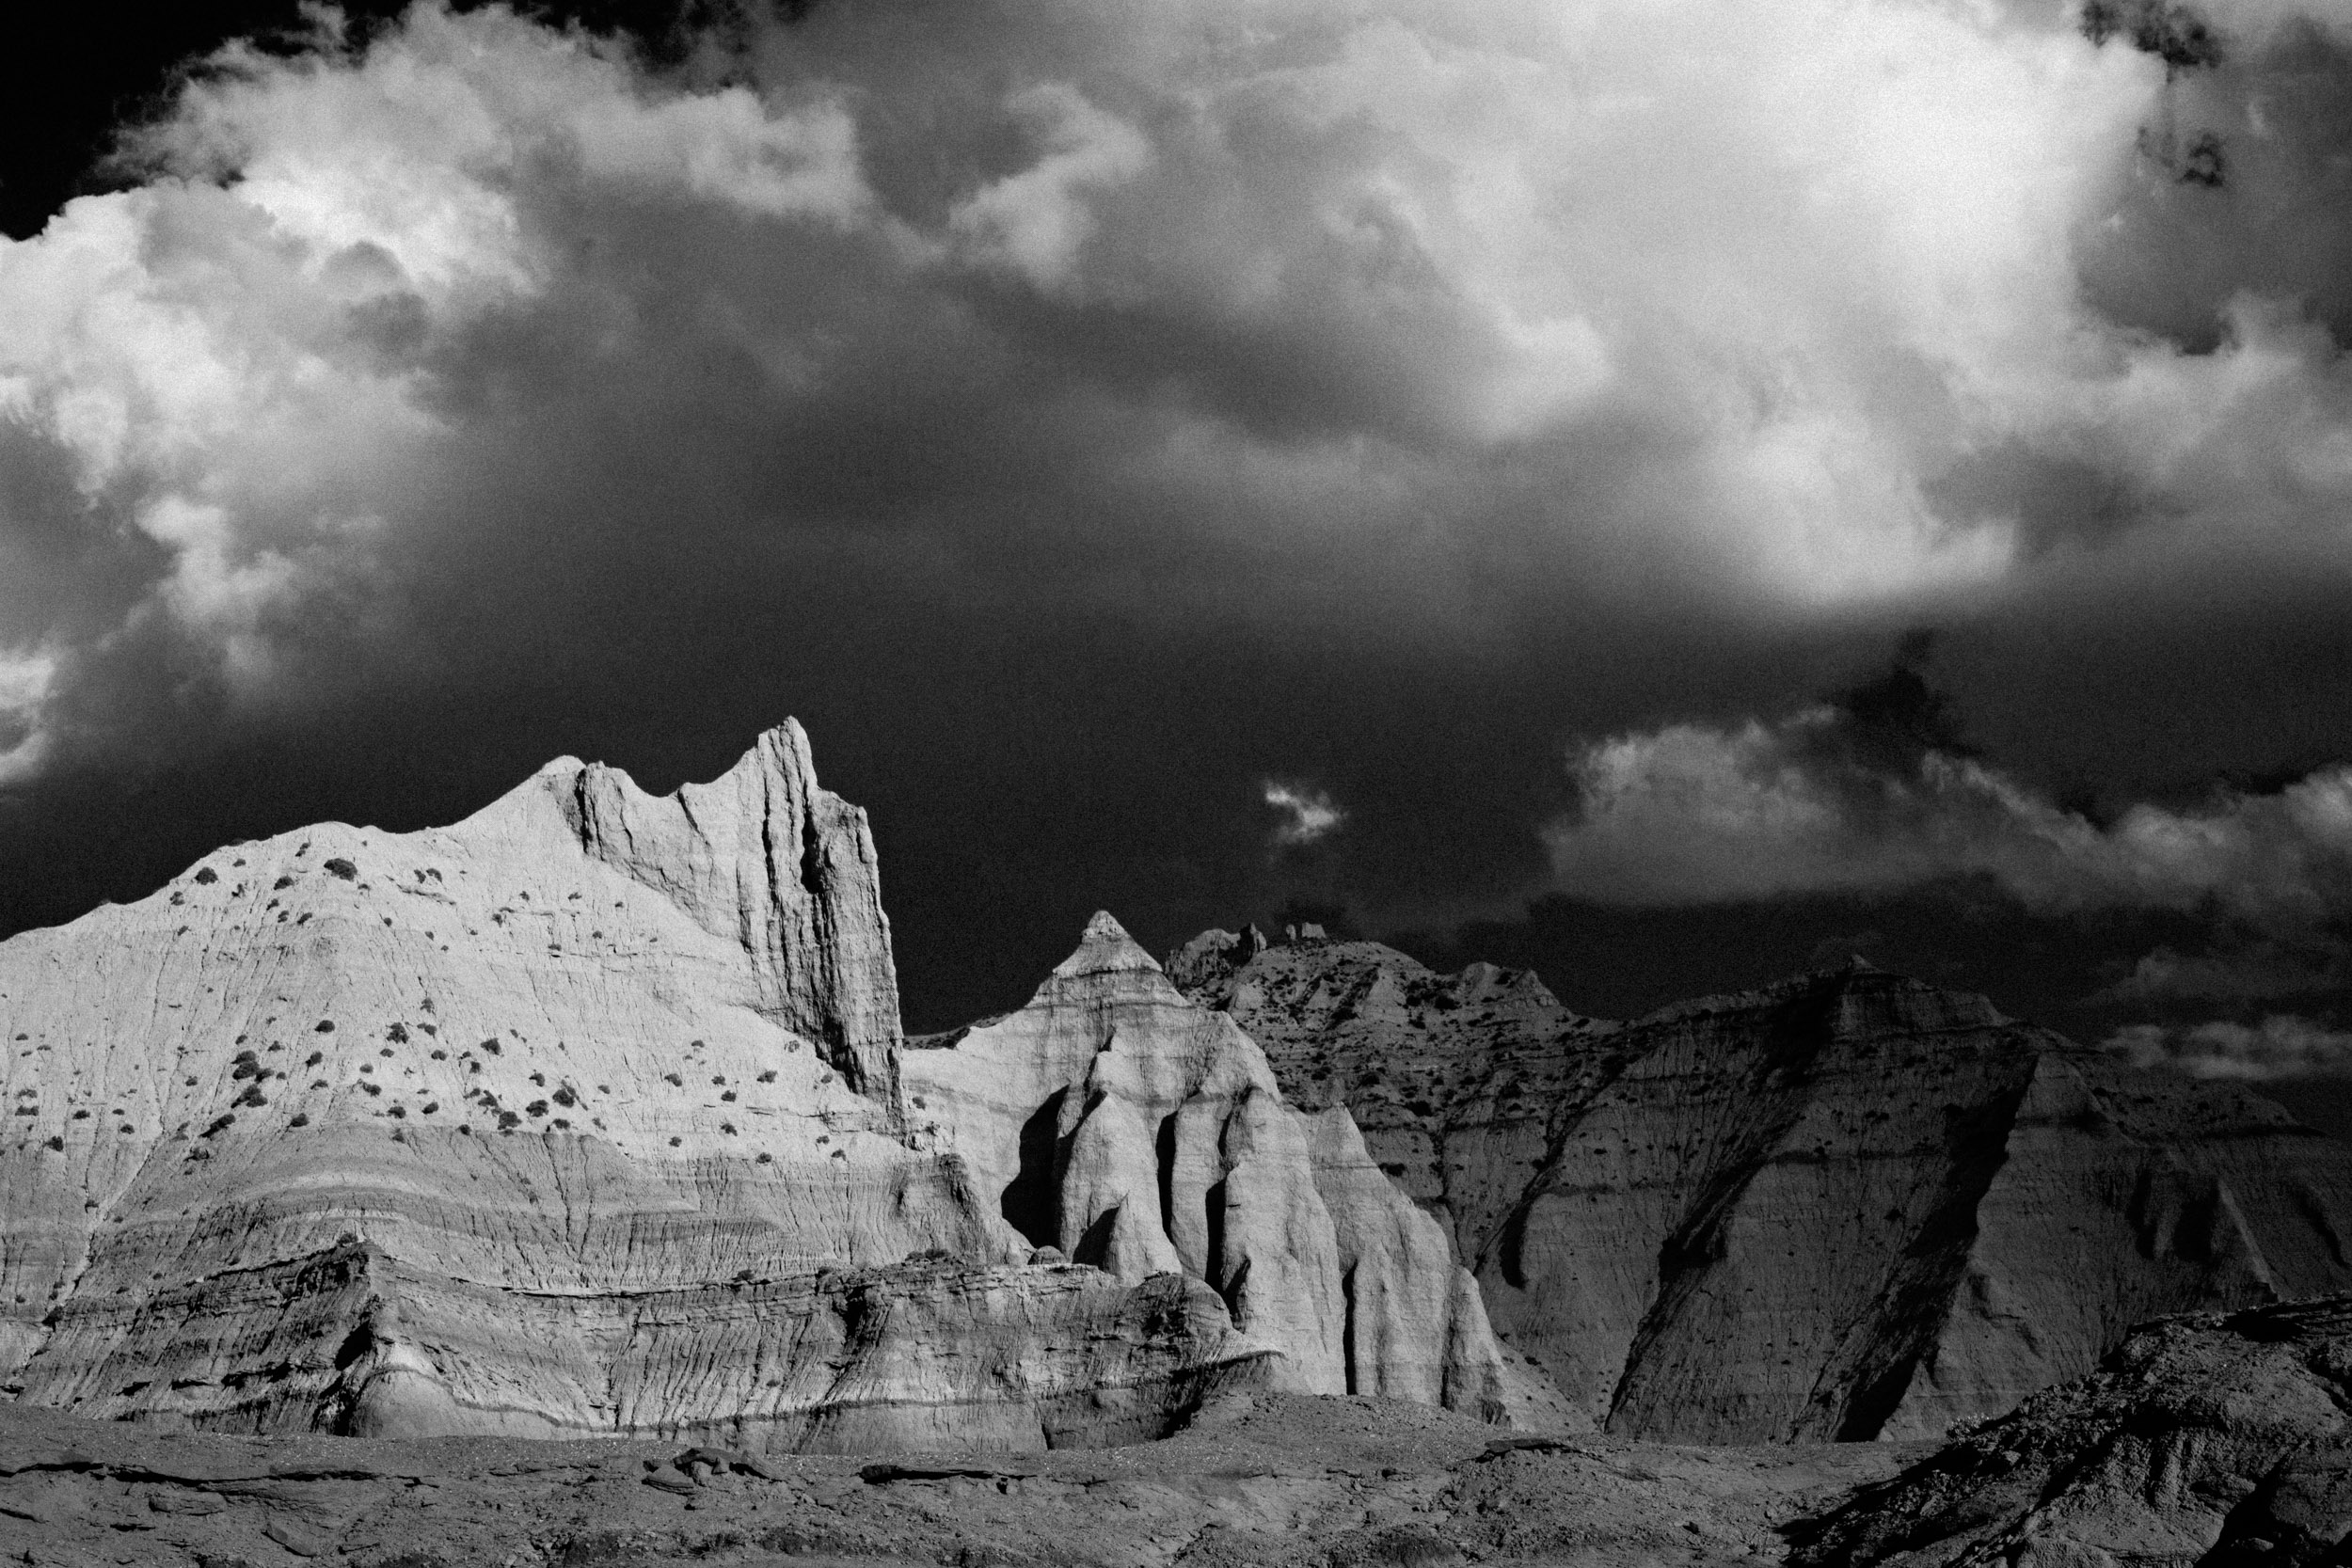 Cragged peaks light up in the afternoon’s light following a southern Utah storm